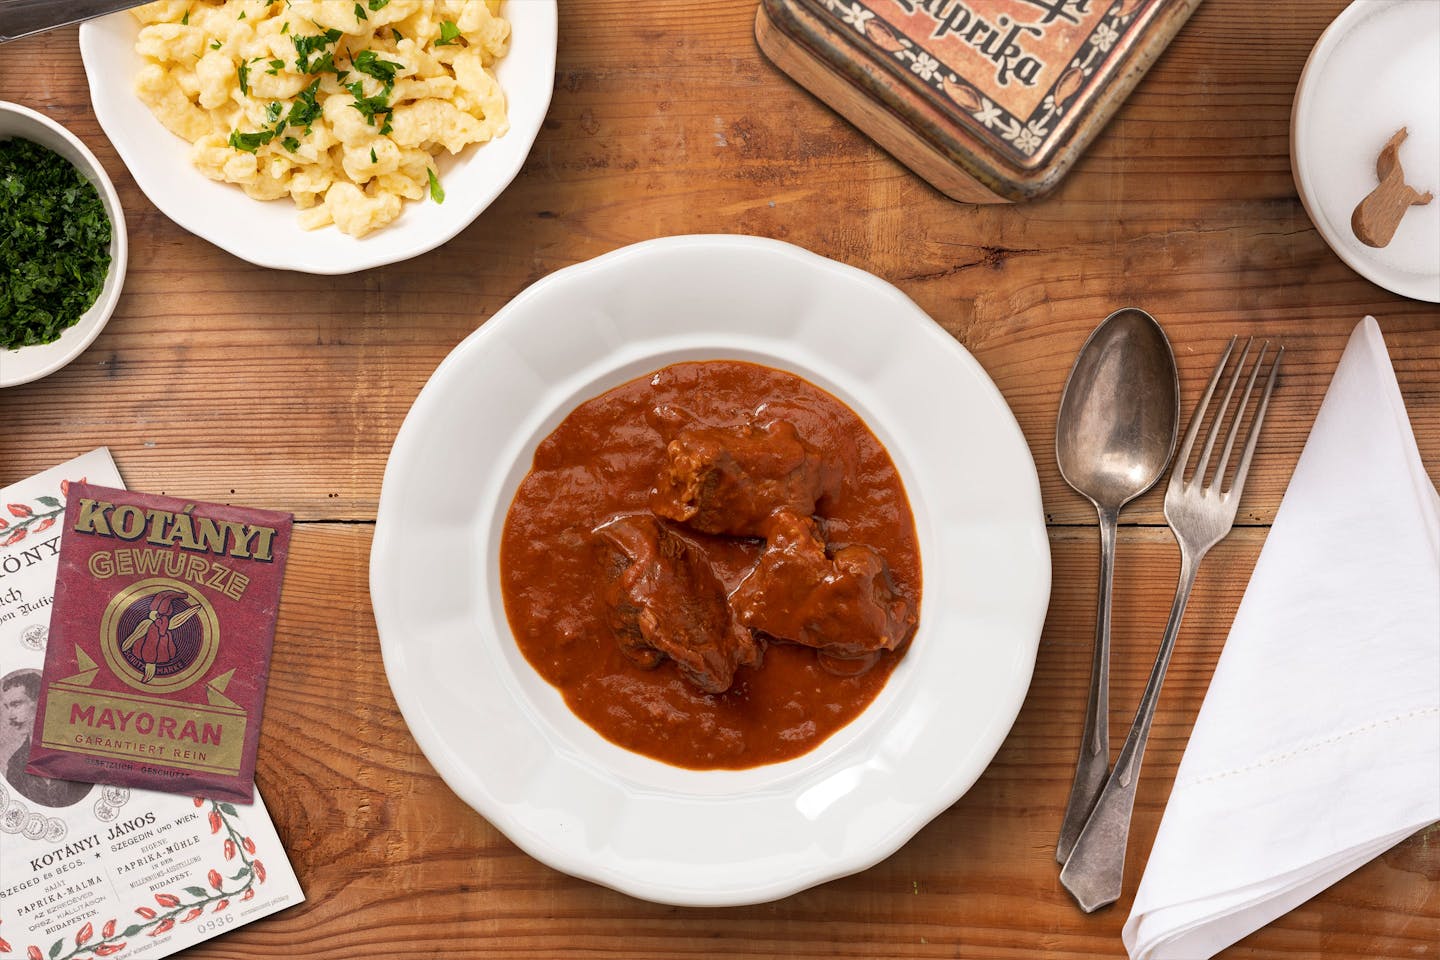 A plate full of goulash and a small bowl of spaetzle arranged on a dark wooden table.